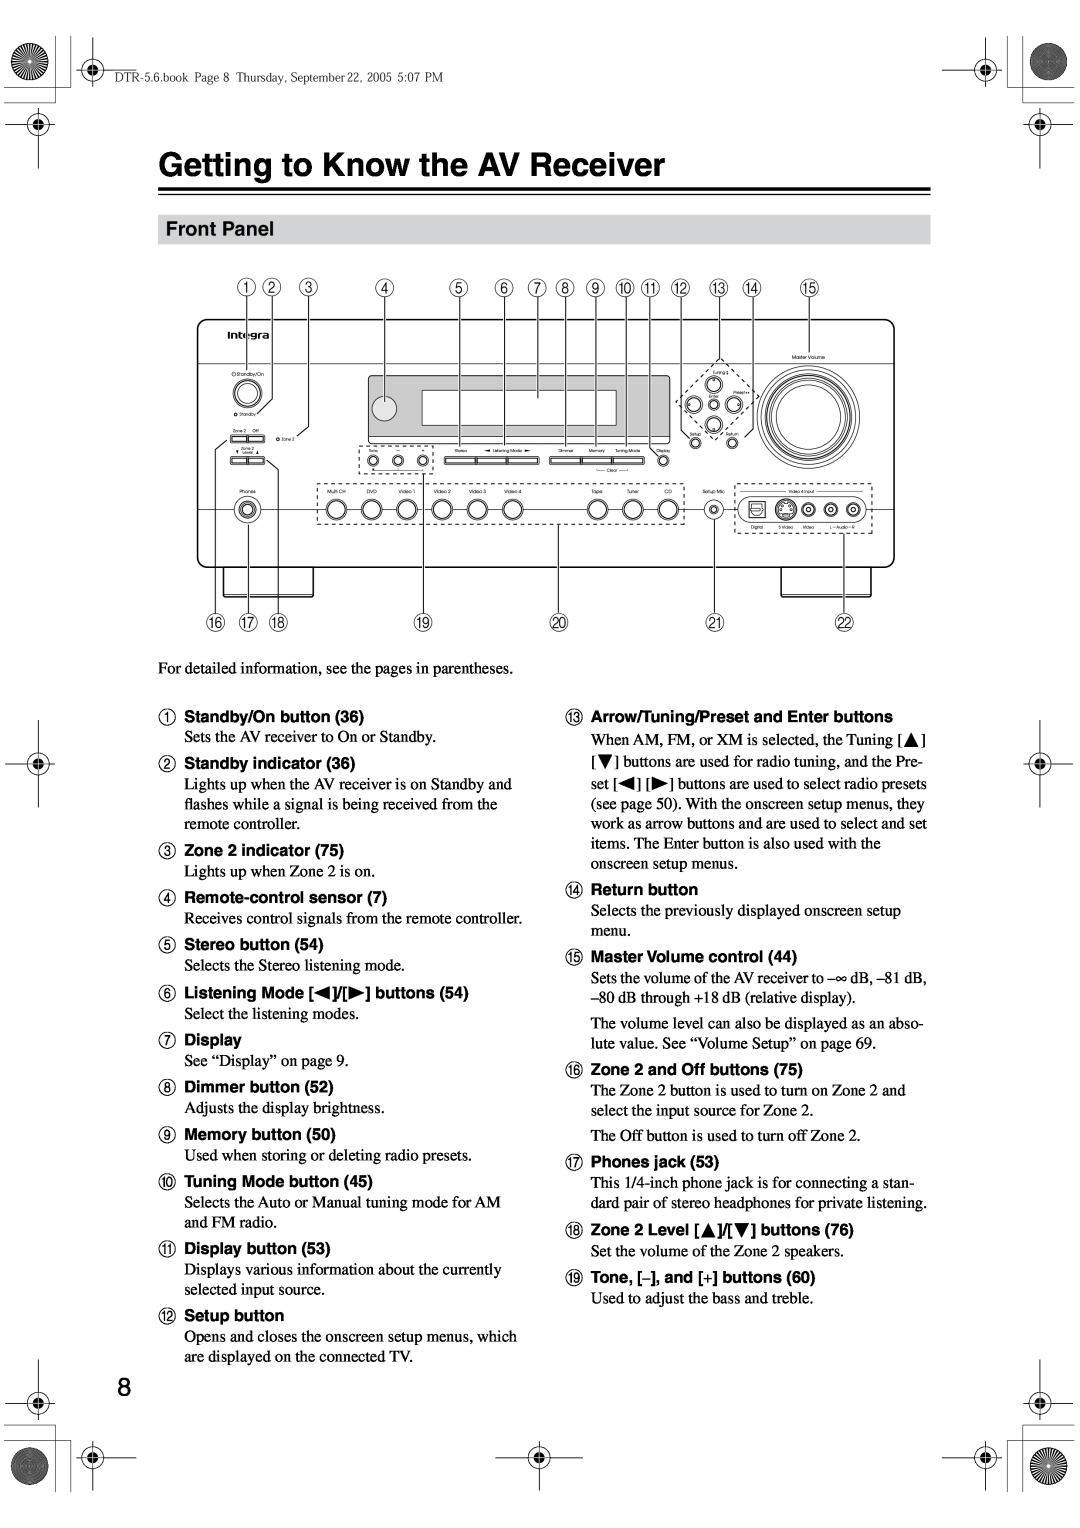 Integra DTR-5.6 instruction manual Getting to Know the AV Receiver, Front Panel, 1 2 3 4 5 6 7 8 9 J K L M N O, P Q R 